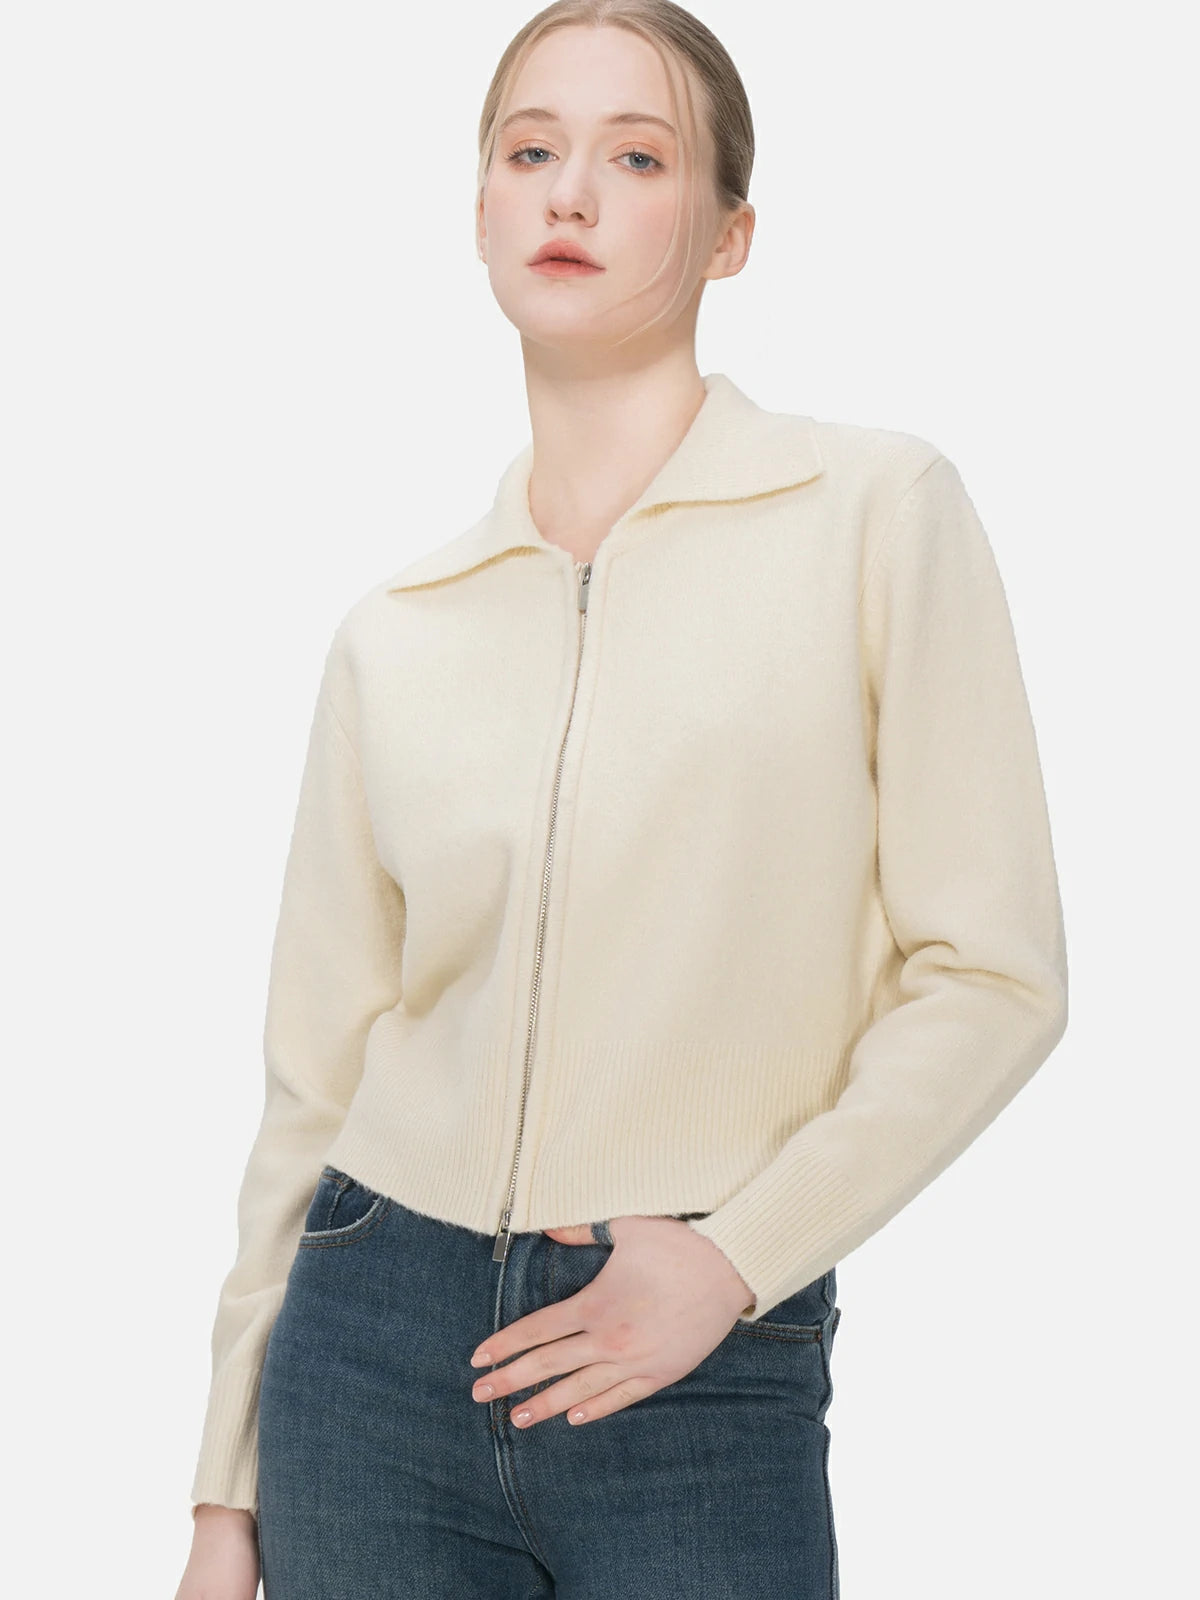 Comfortable and stylish monochromatic cardigan with a lapel collar and dual zipper